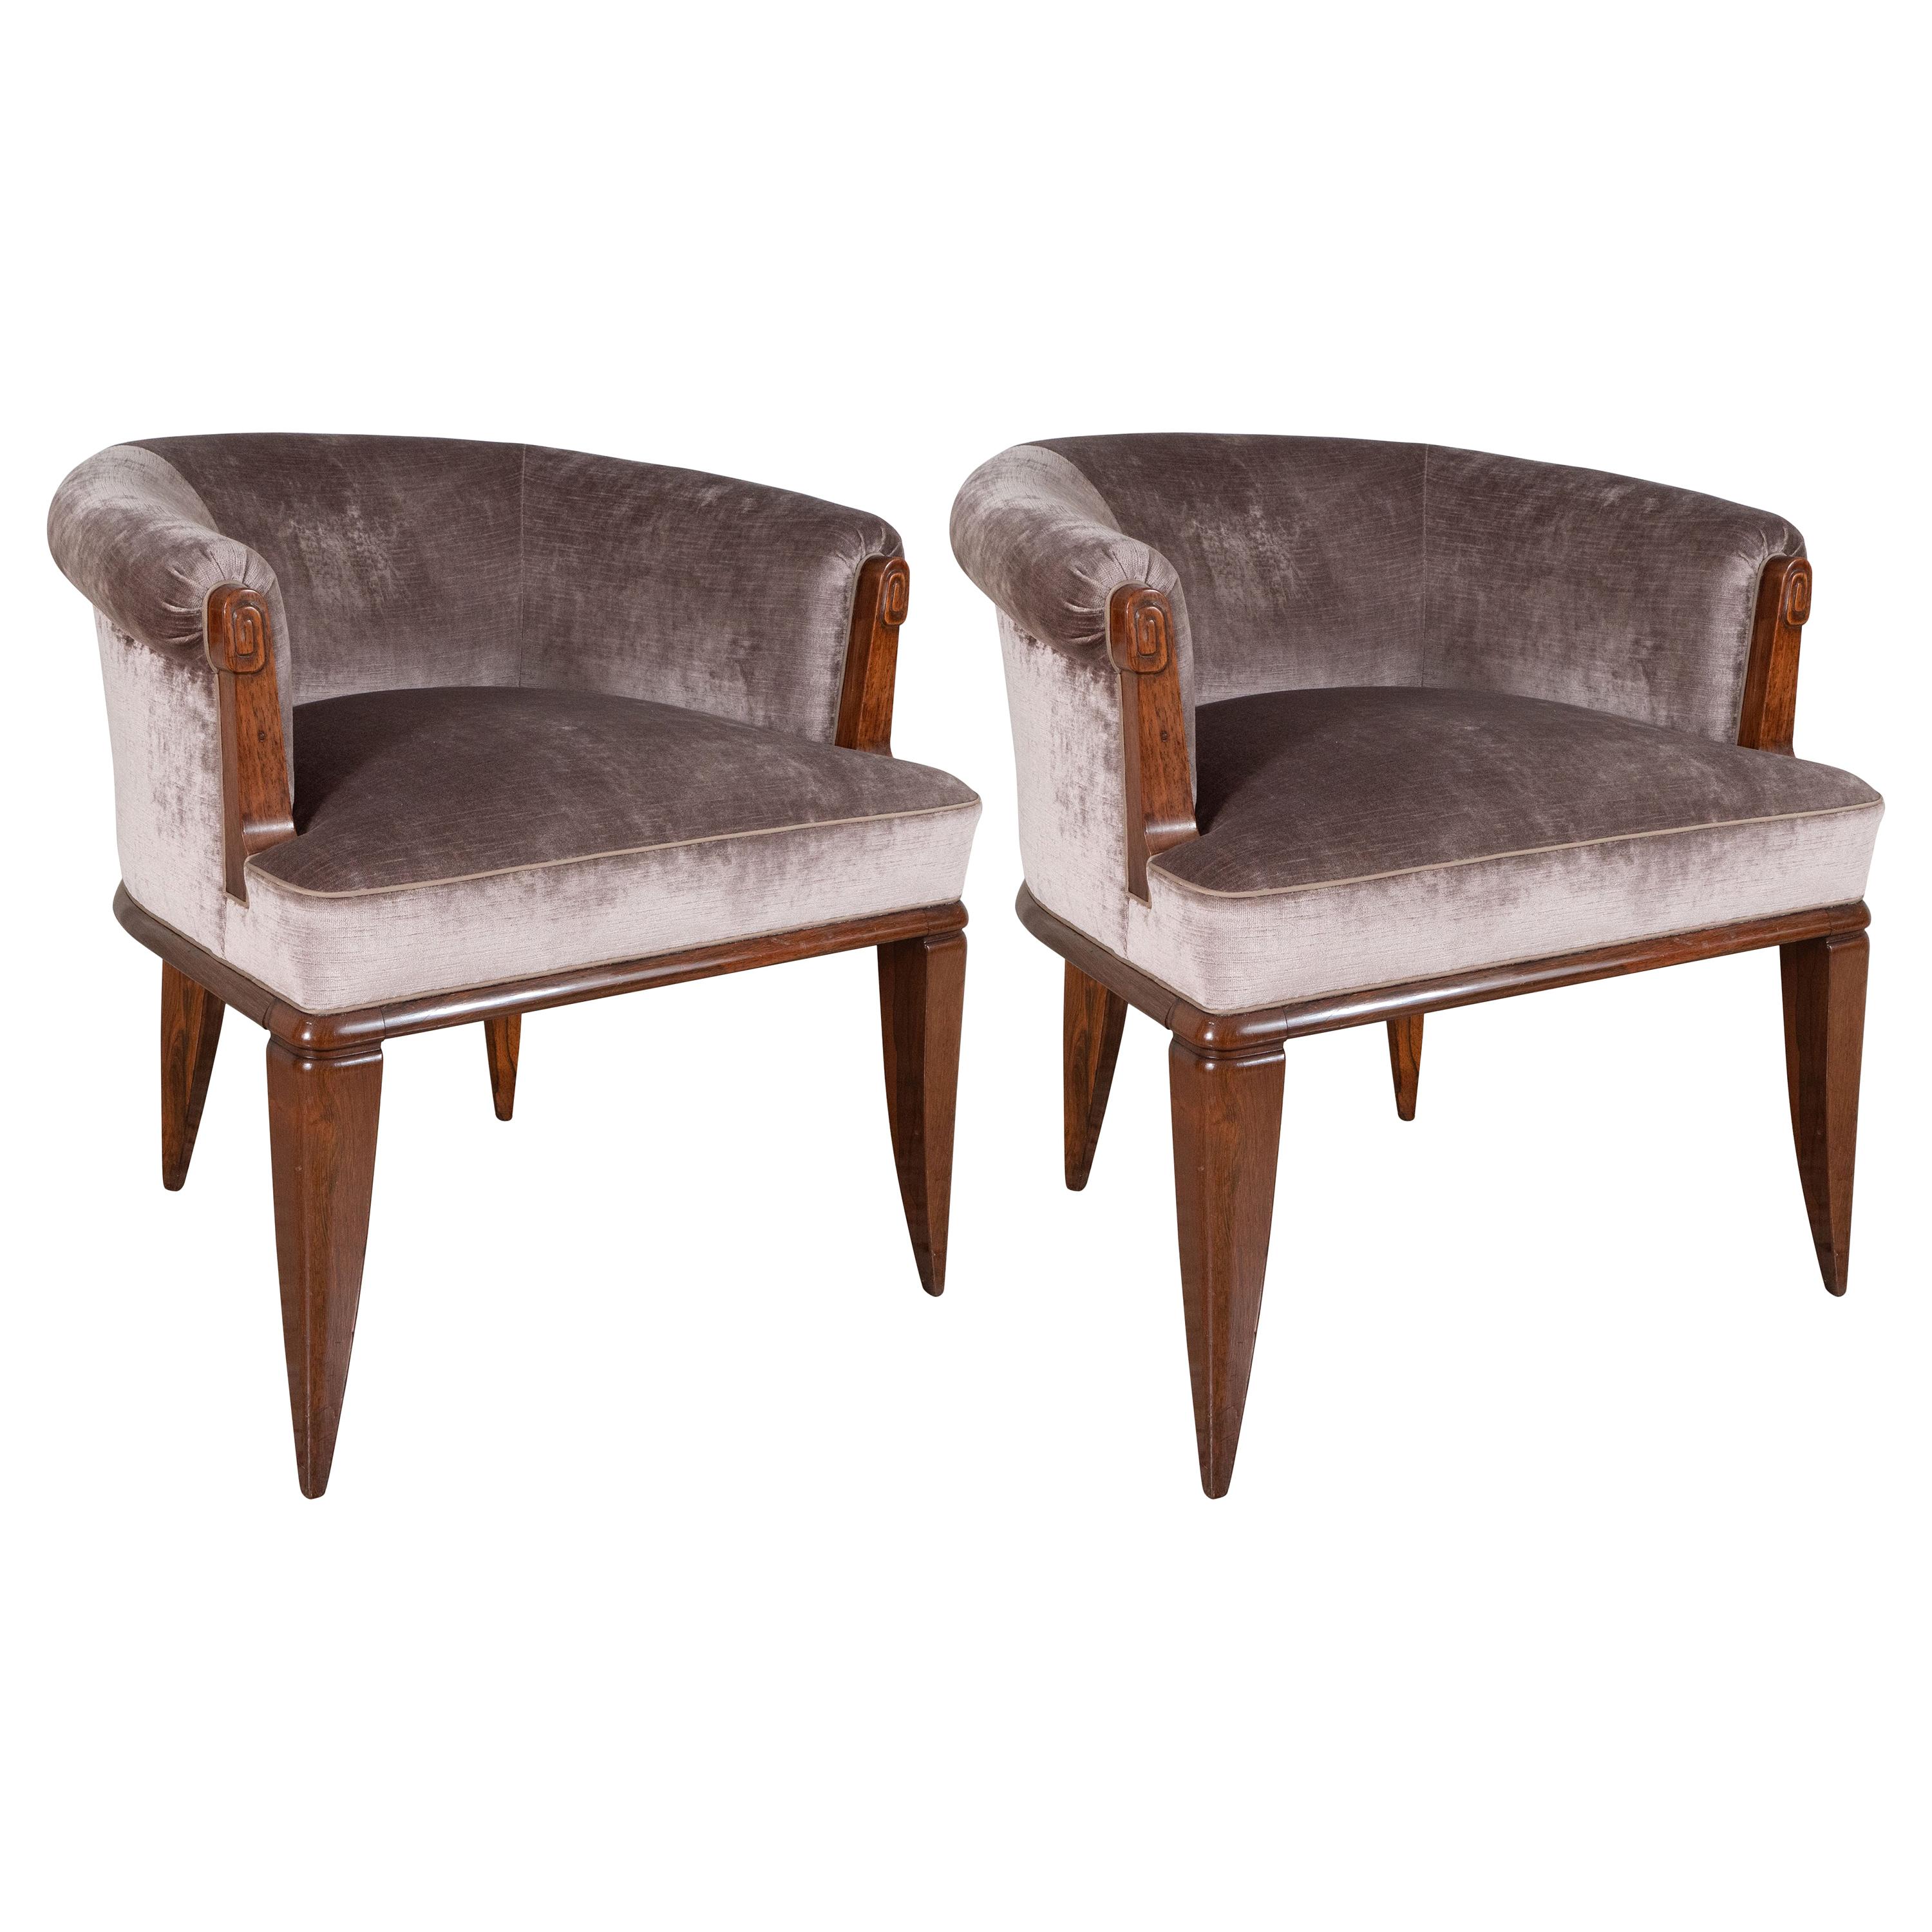 Pair of Dominique Rosewood Armchairs from Alan Moss